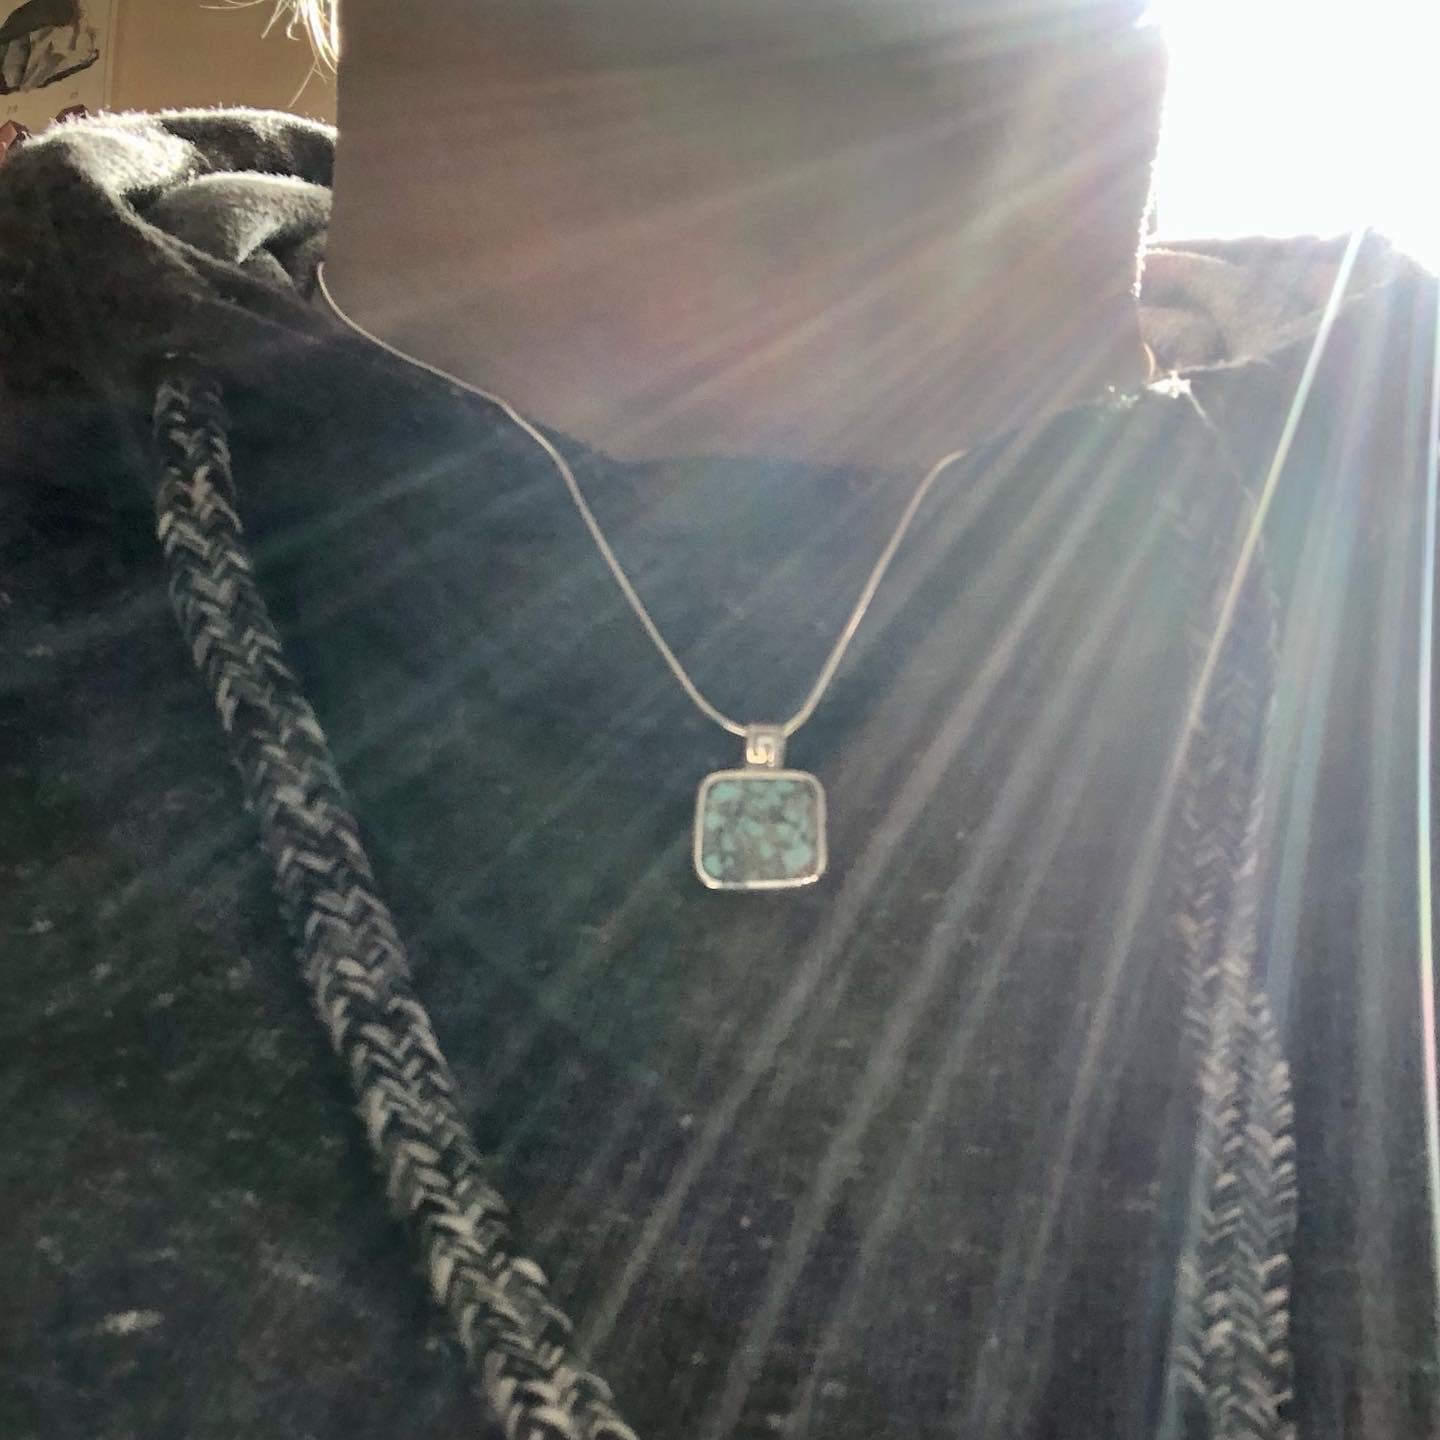 Memorial Ashes Imprint Disc Necklace | For Him or For Her - Hold upon Heart